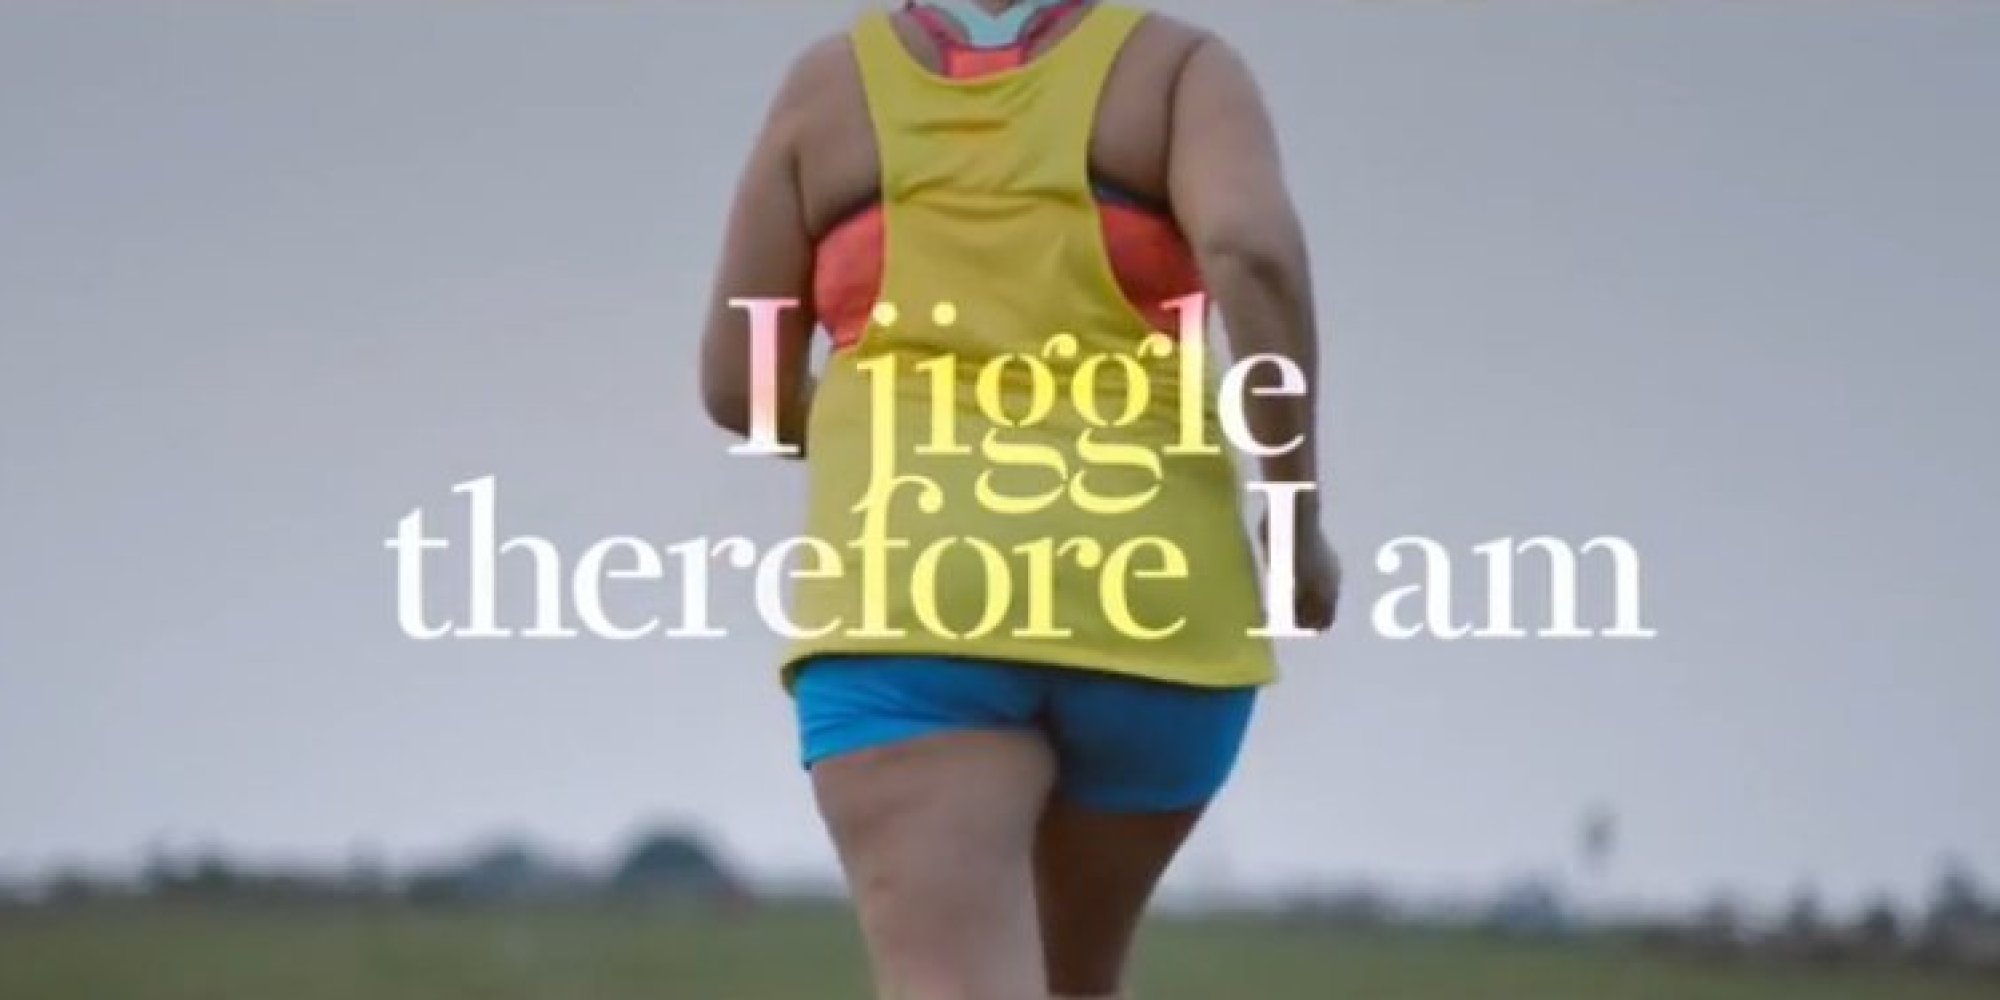 Sport England S This Girl Can Campaign Inspires Women To Get Fit By Using Real Woman Cellulite